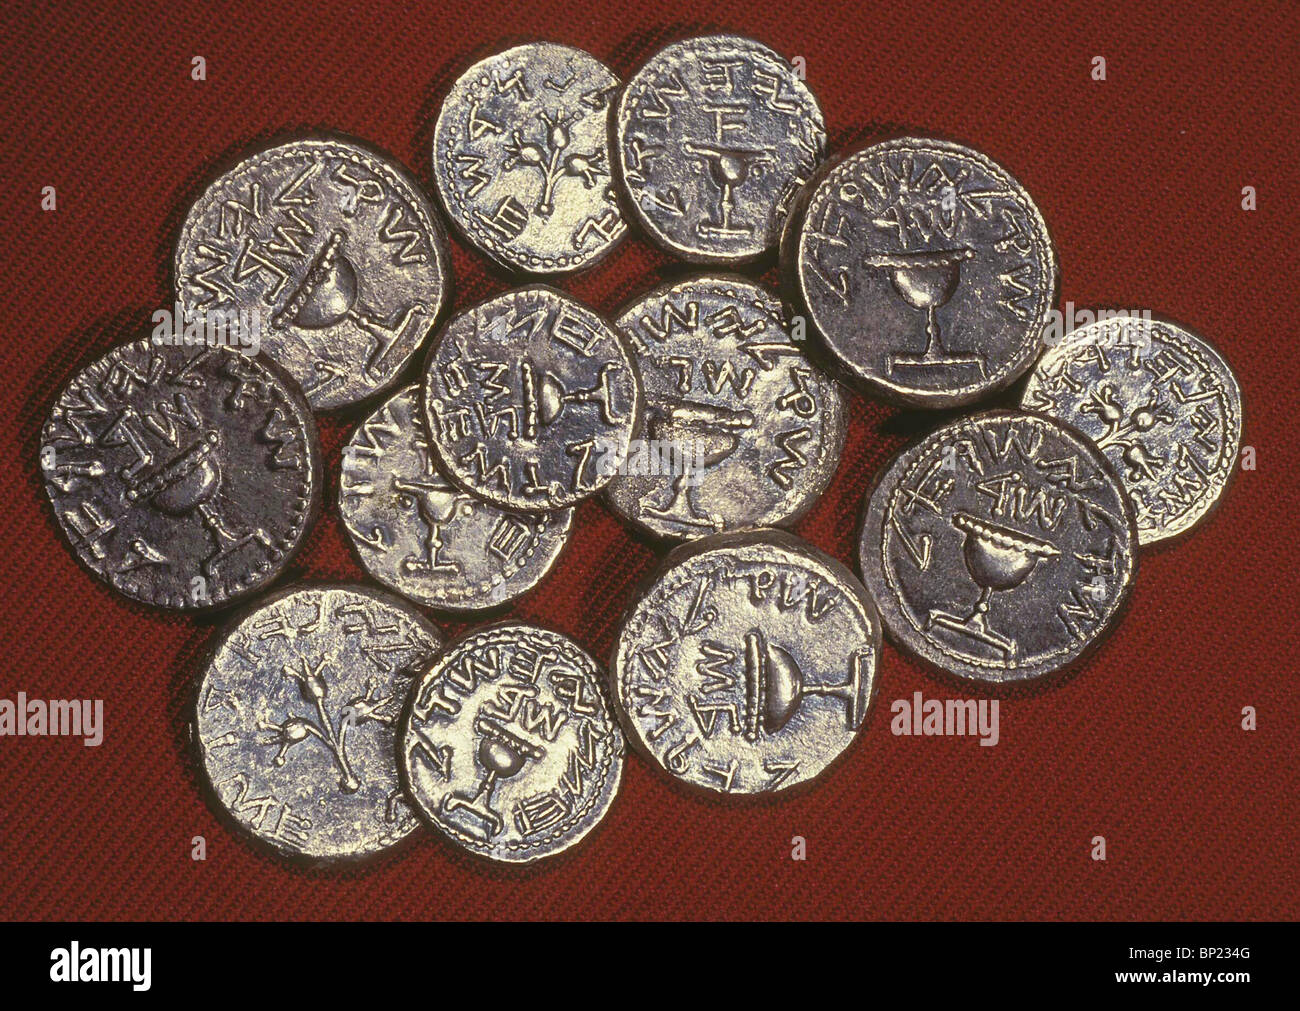 112. A HORDE OF 'SILVER SHEKELS' EXCAVATED IN HERODIAN JERUSALEM, C. 66-70TH YEAR AD. Stock Photo